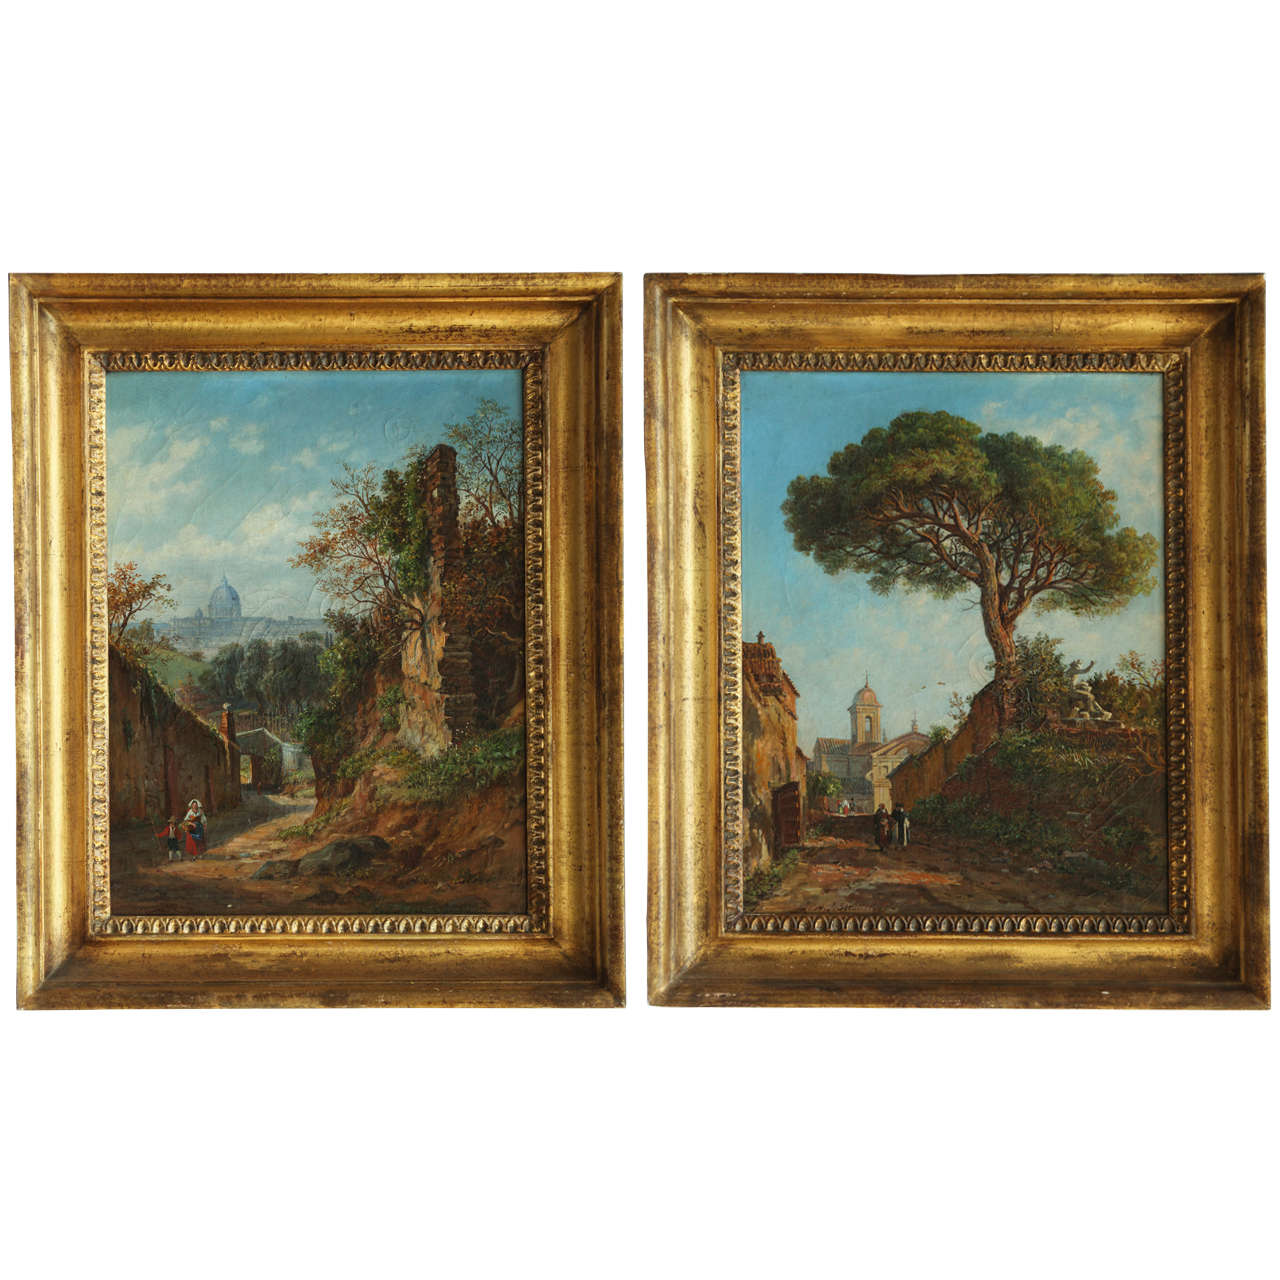 A.J Strutt, Pair of Views of the Roman Landscapes, Oil on Canvas, 19th Century